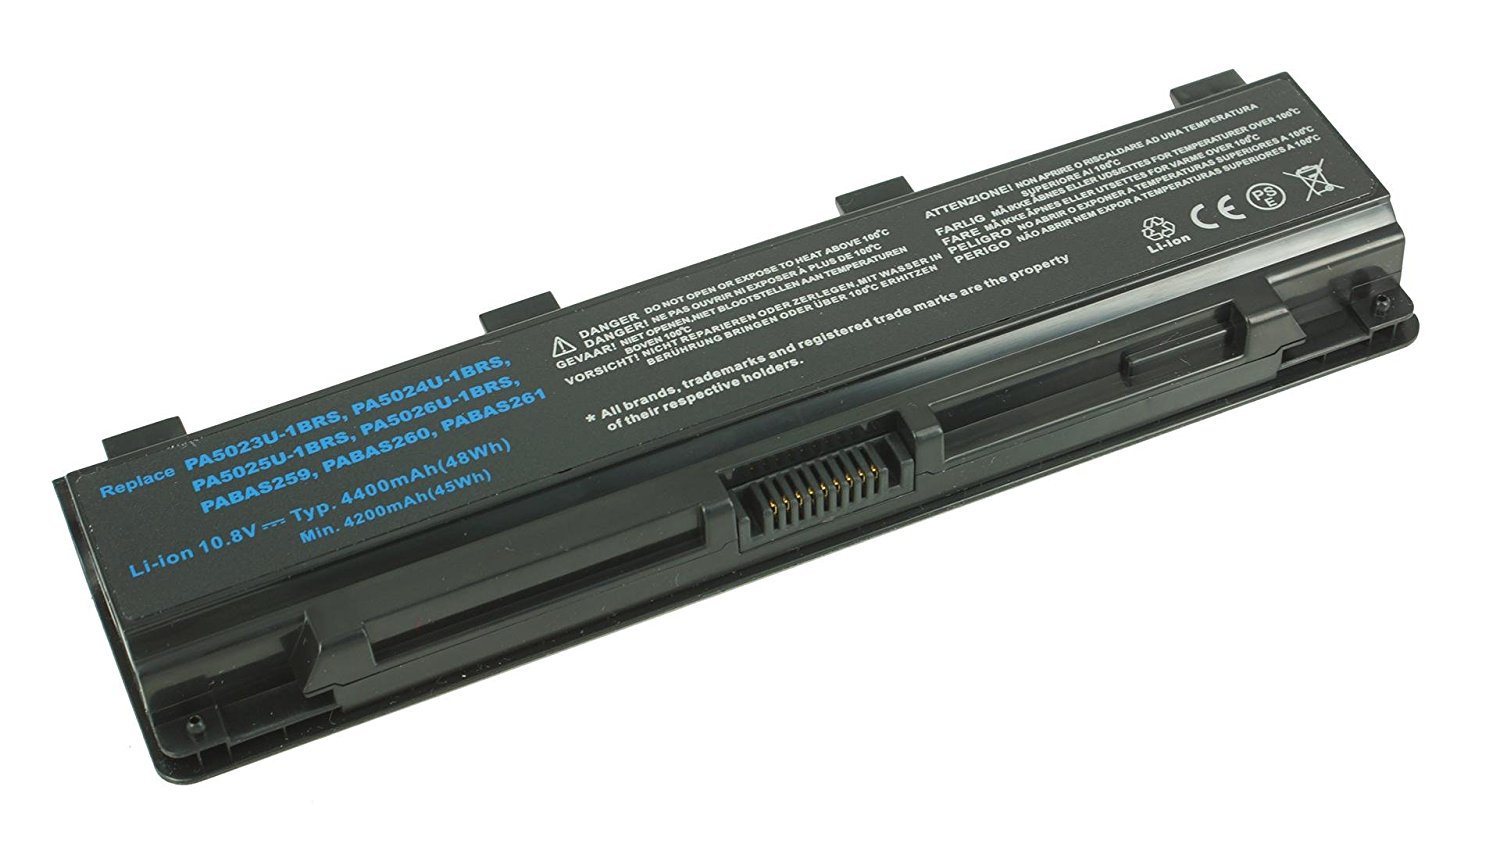 Toshiba Satellite C40D-ASP4263KM (PSCDSM-005TM1) Battery Replacement 11/1V 4400mAh 6-cell 67Wh